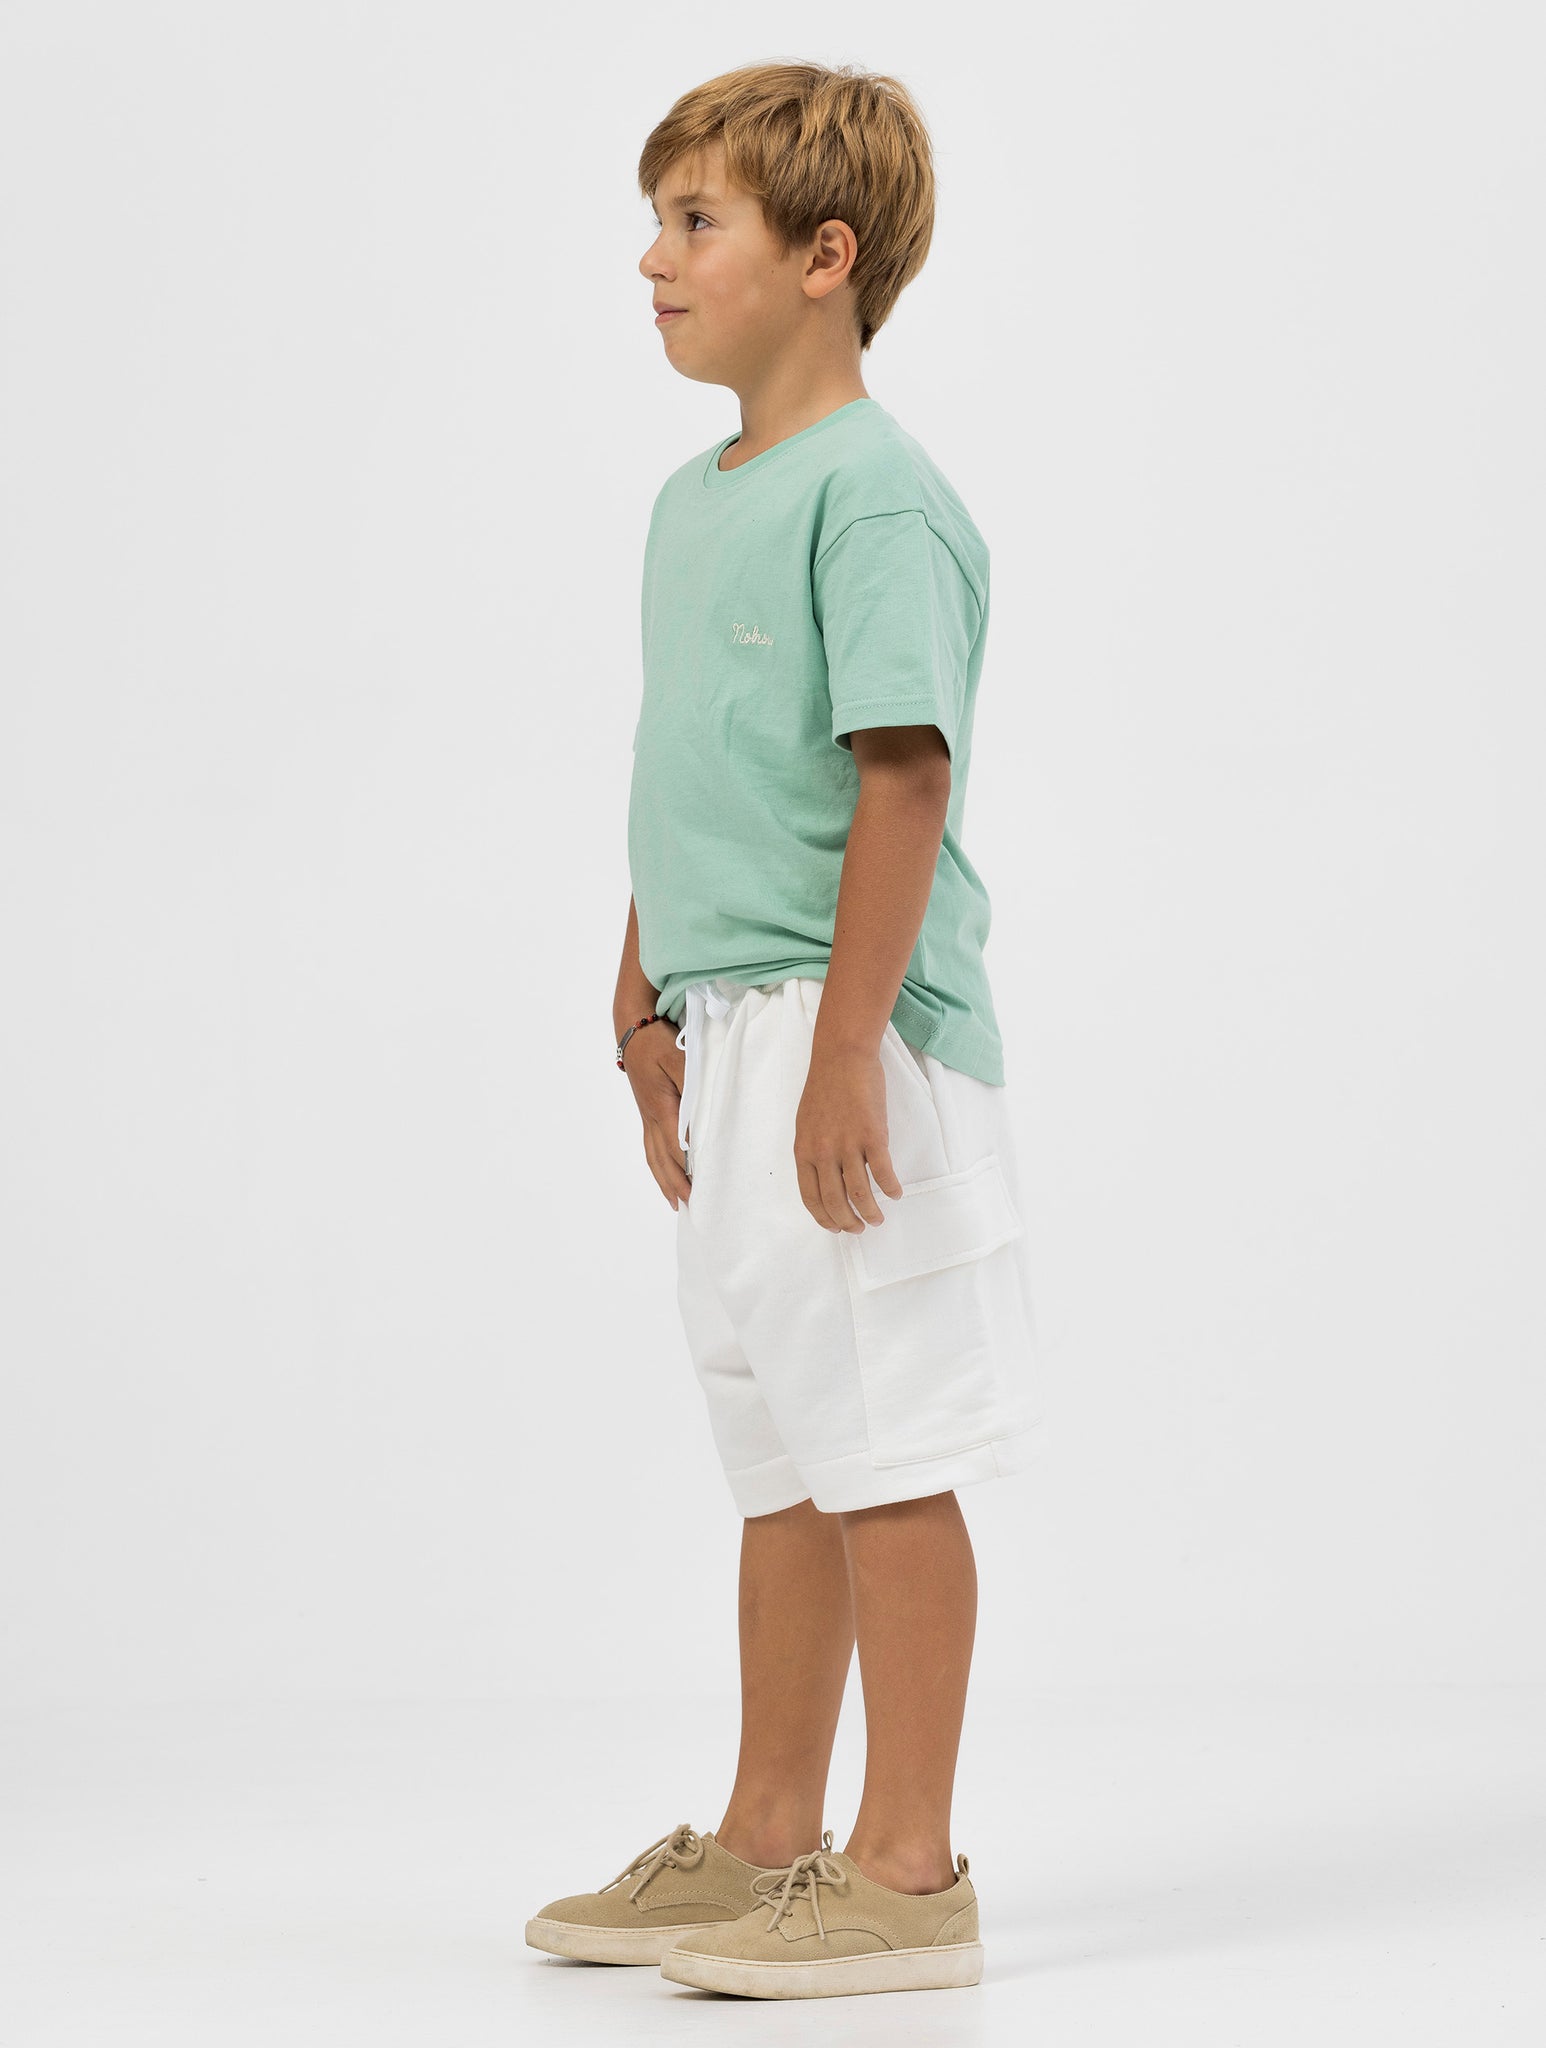 NOHOW LOGO KID'S T-SHIRT IN MINT